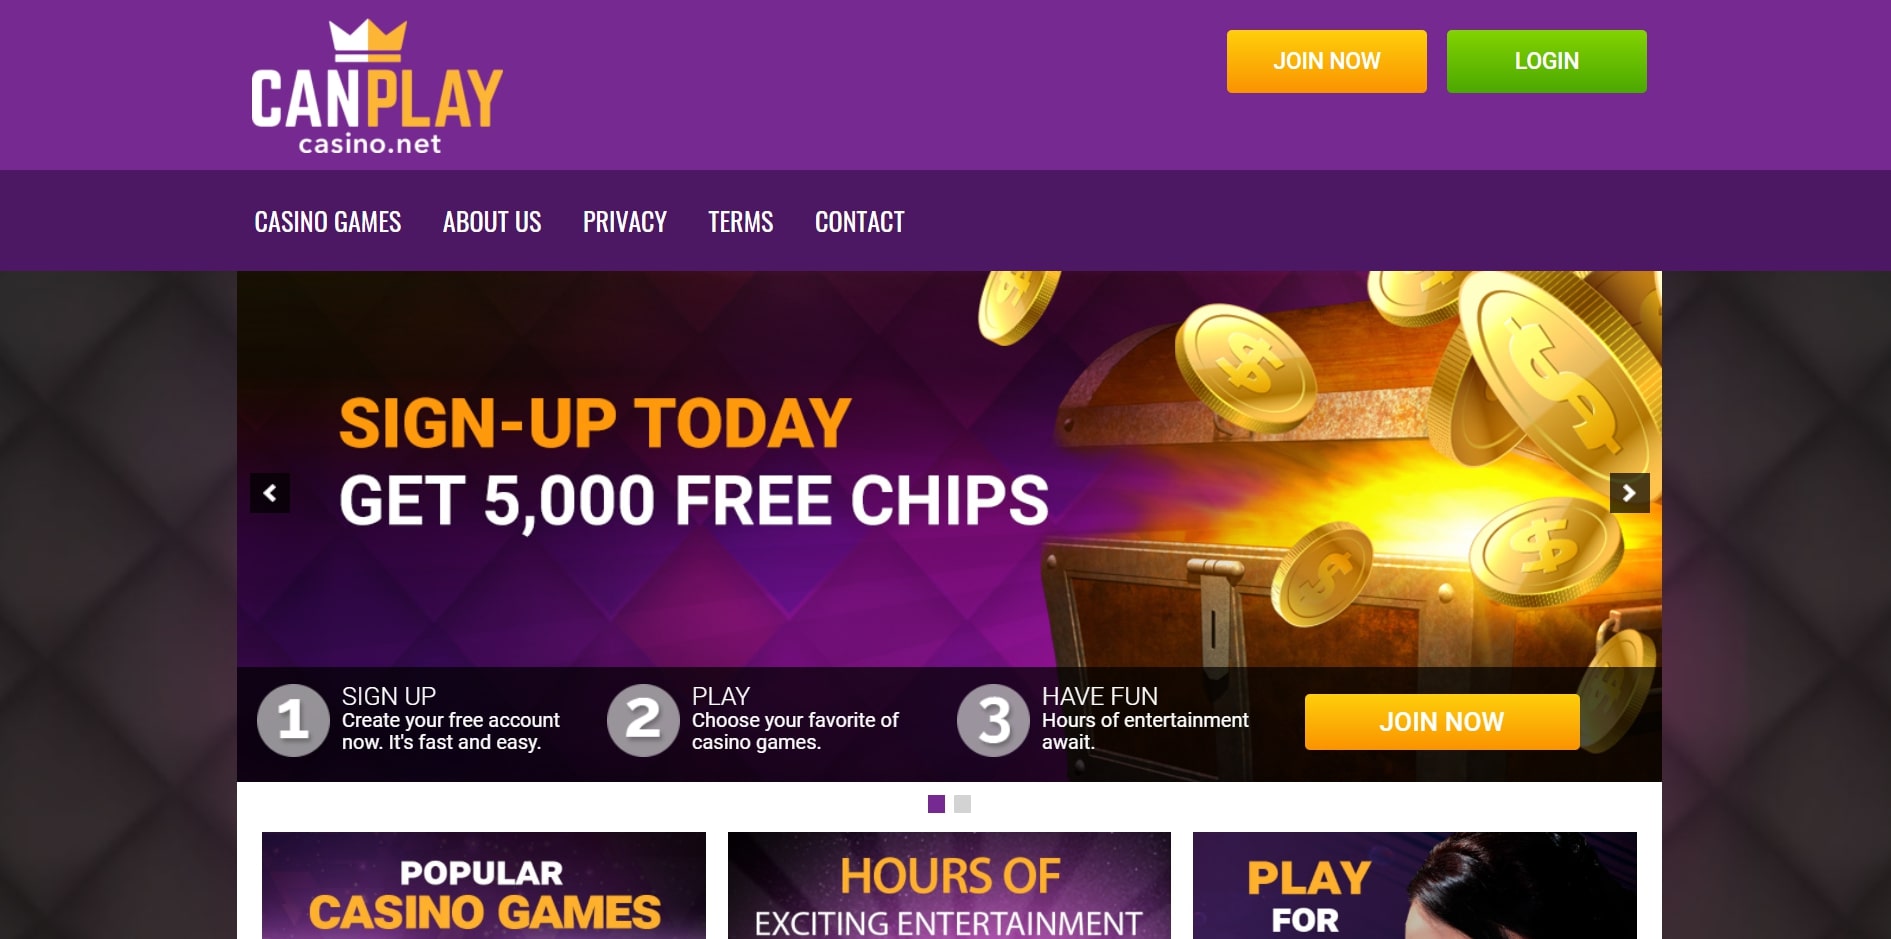 CanPlay Casino Review